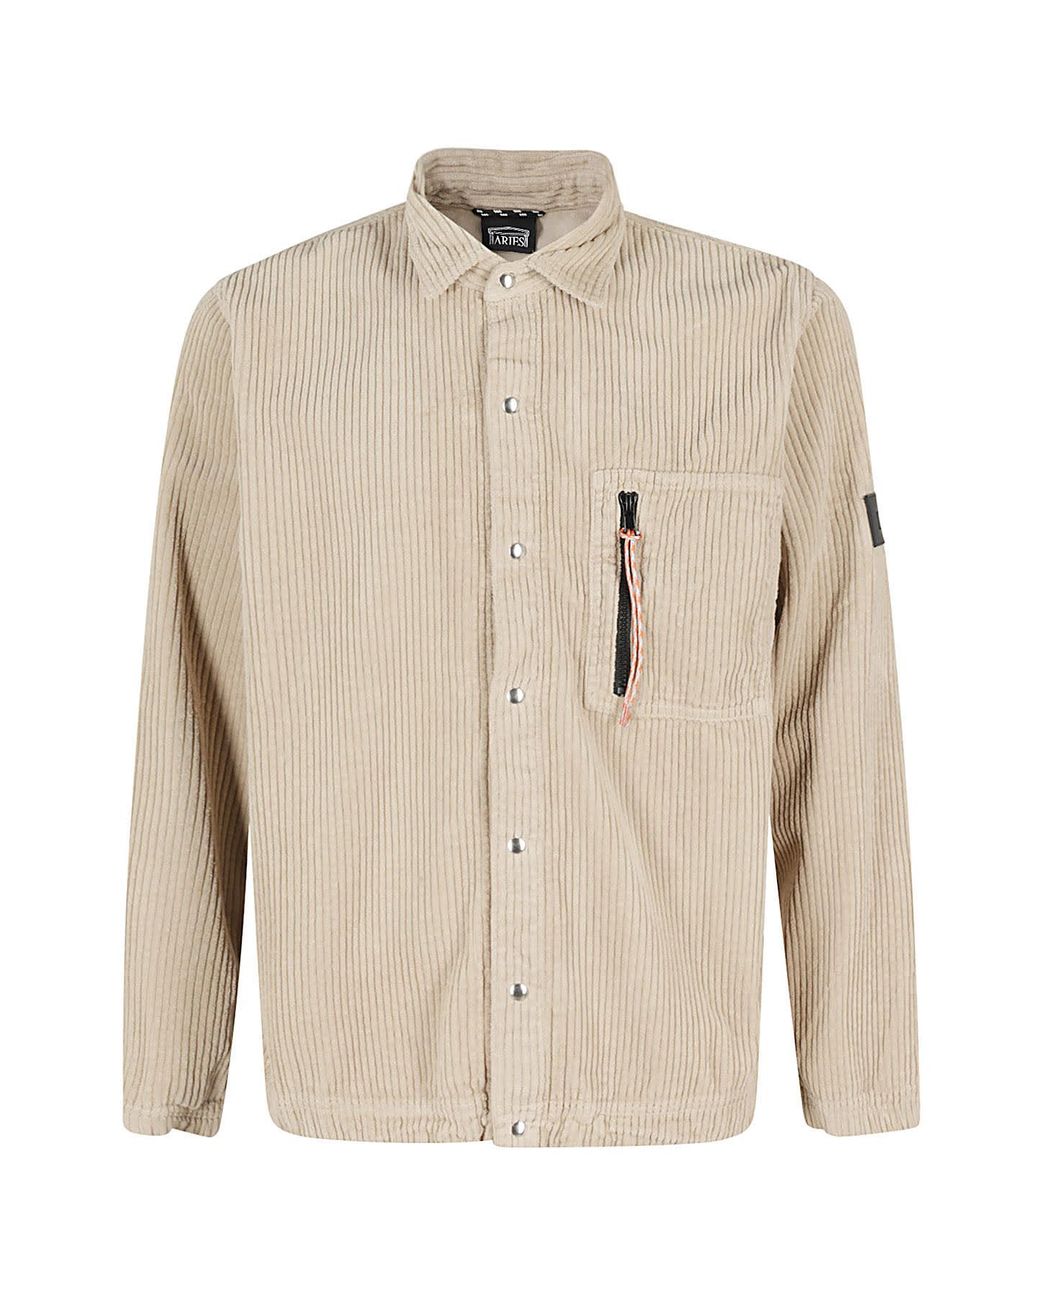 Aries Corduroy Overshirt in Natural for Men | Lyst